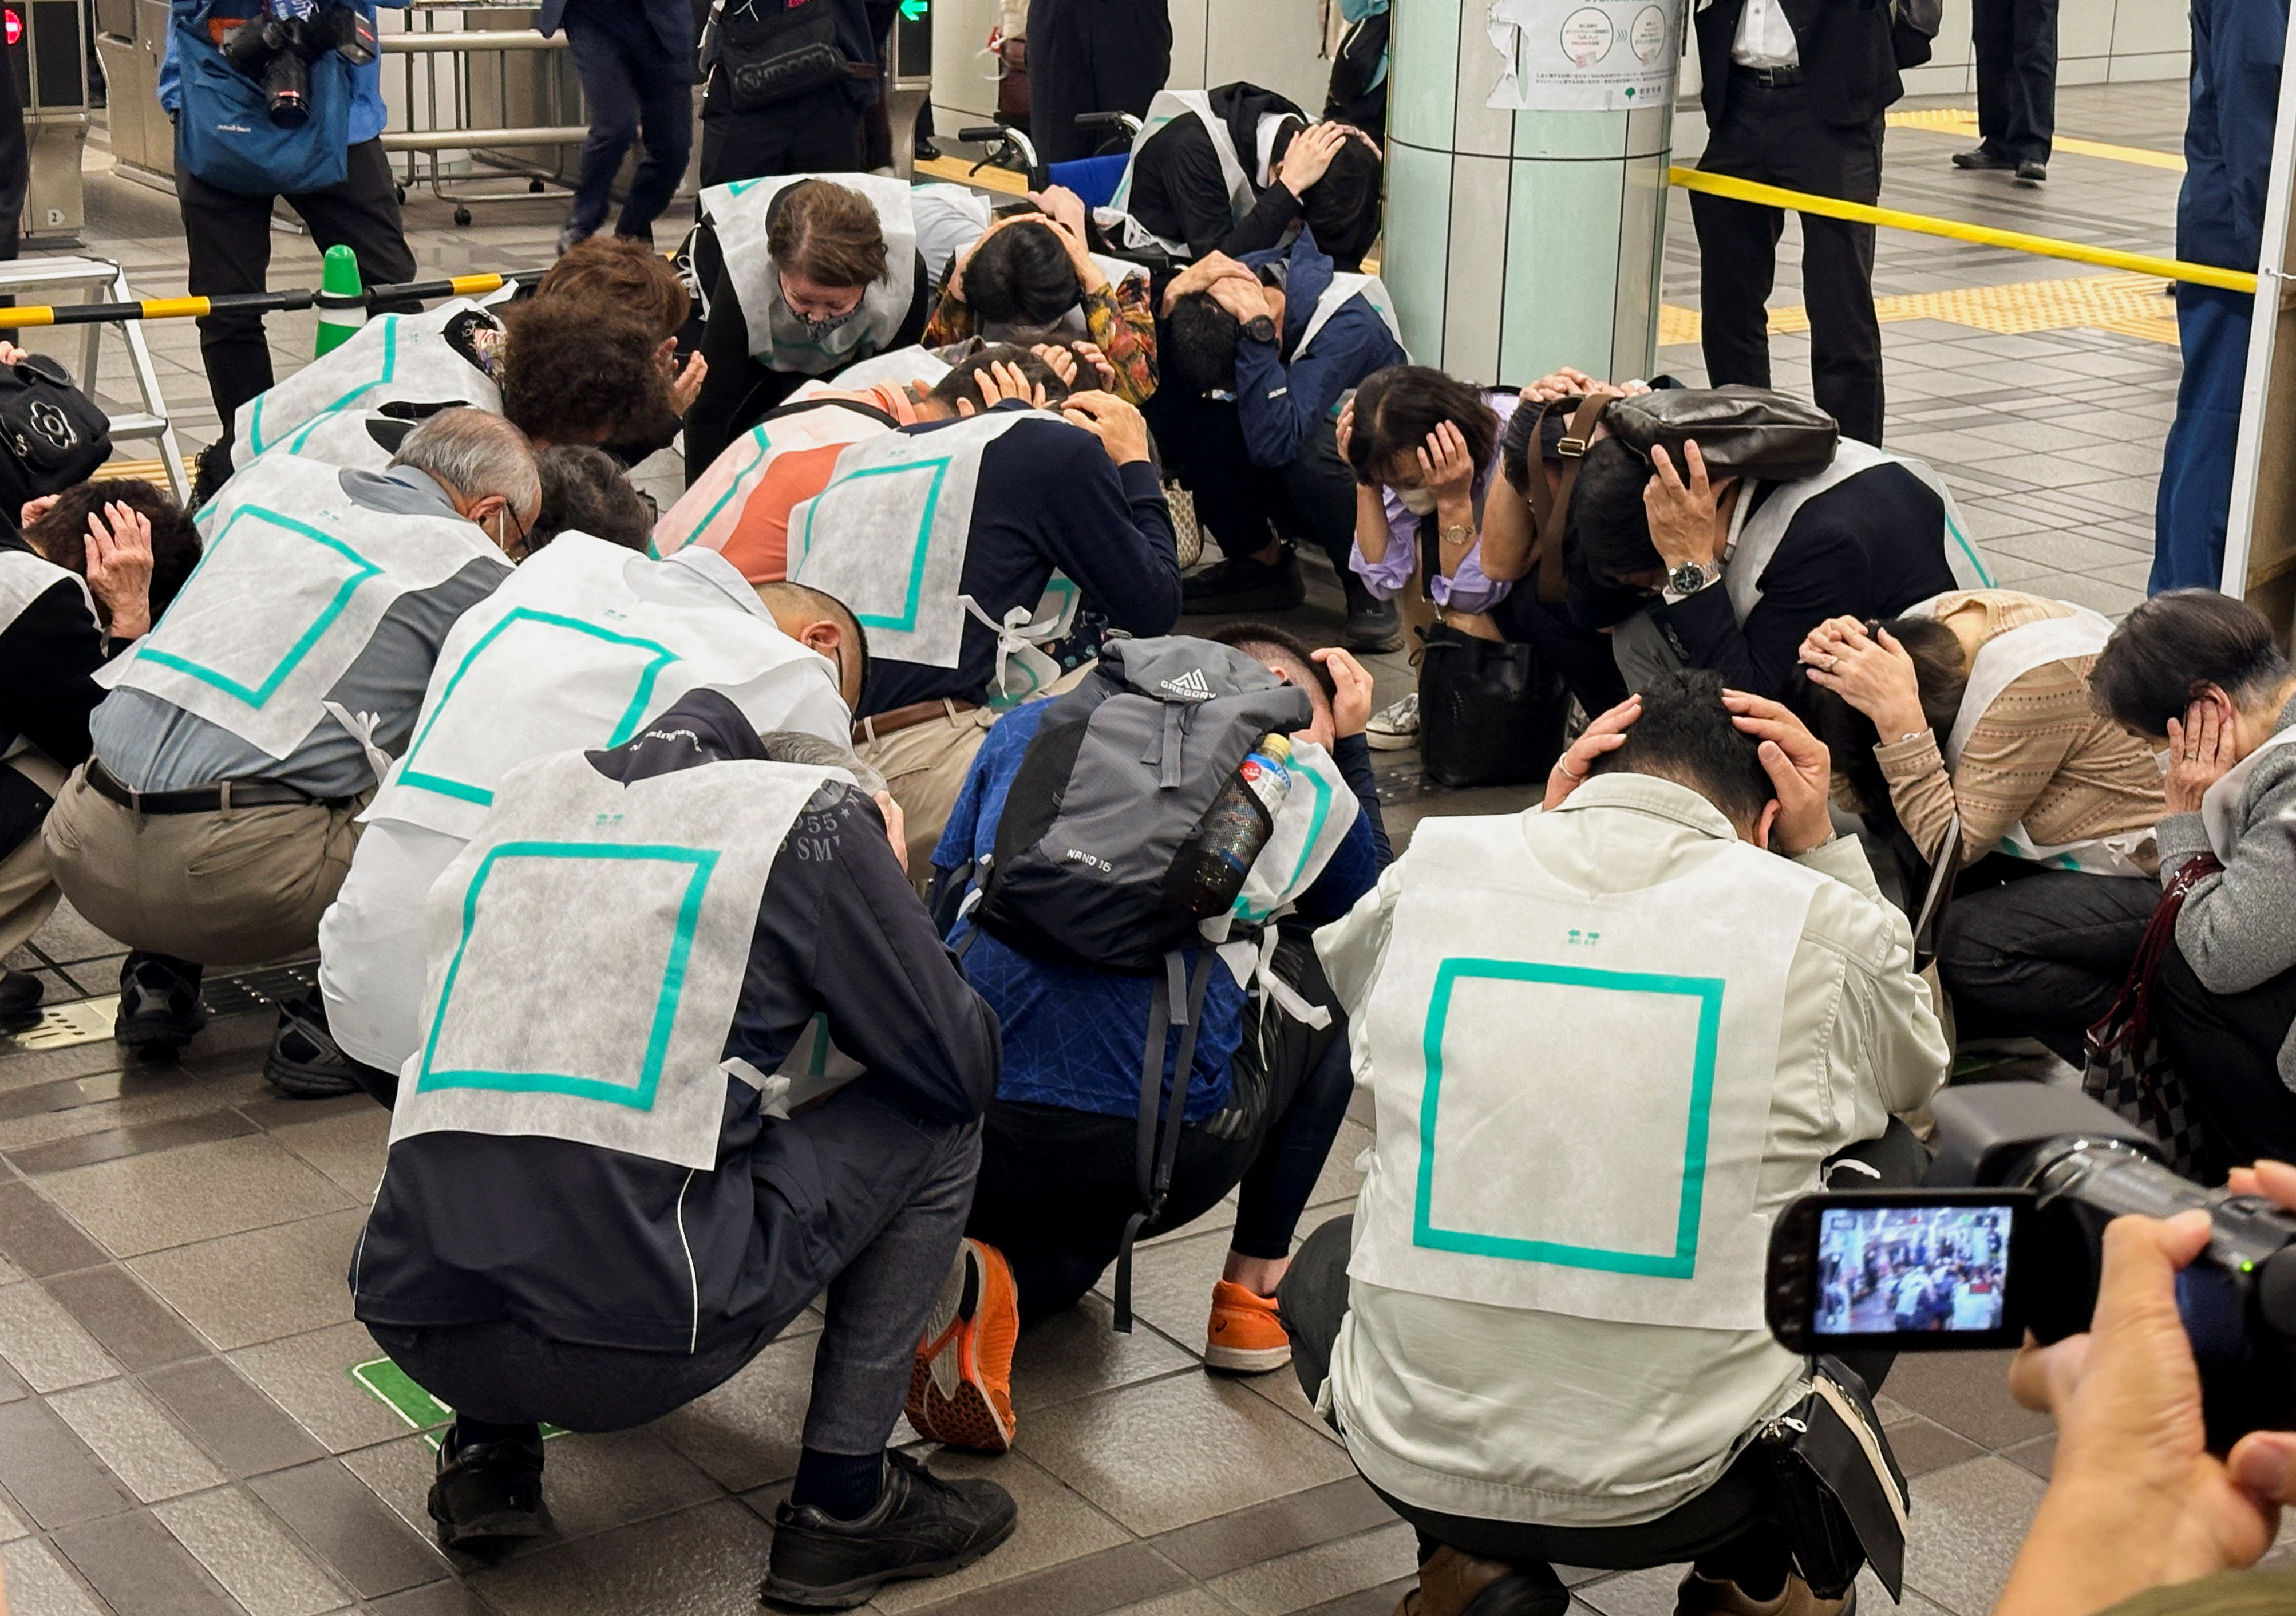 Drill participants cover their heads in a designated area inside Nerima train station in Tokyo